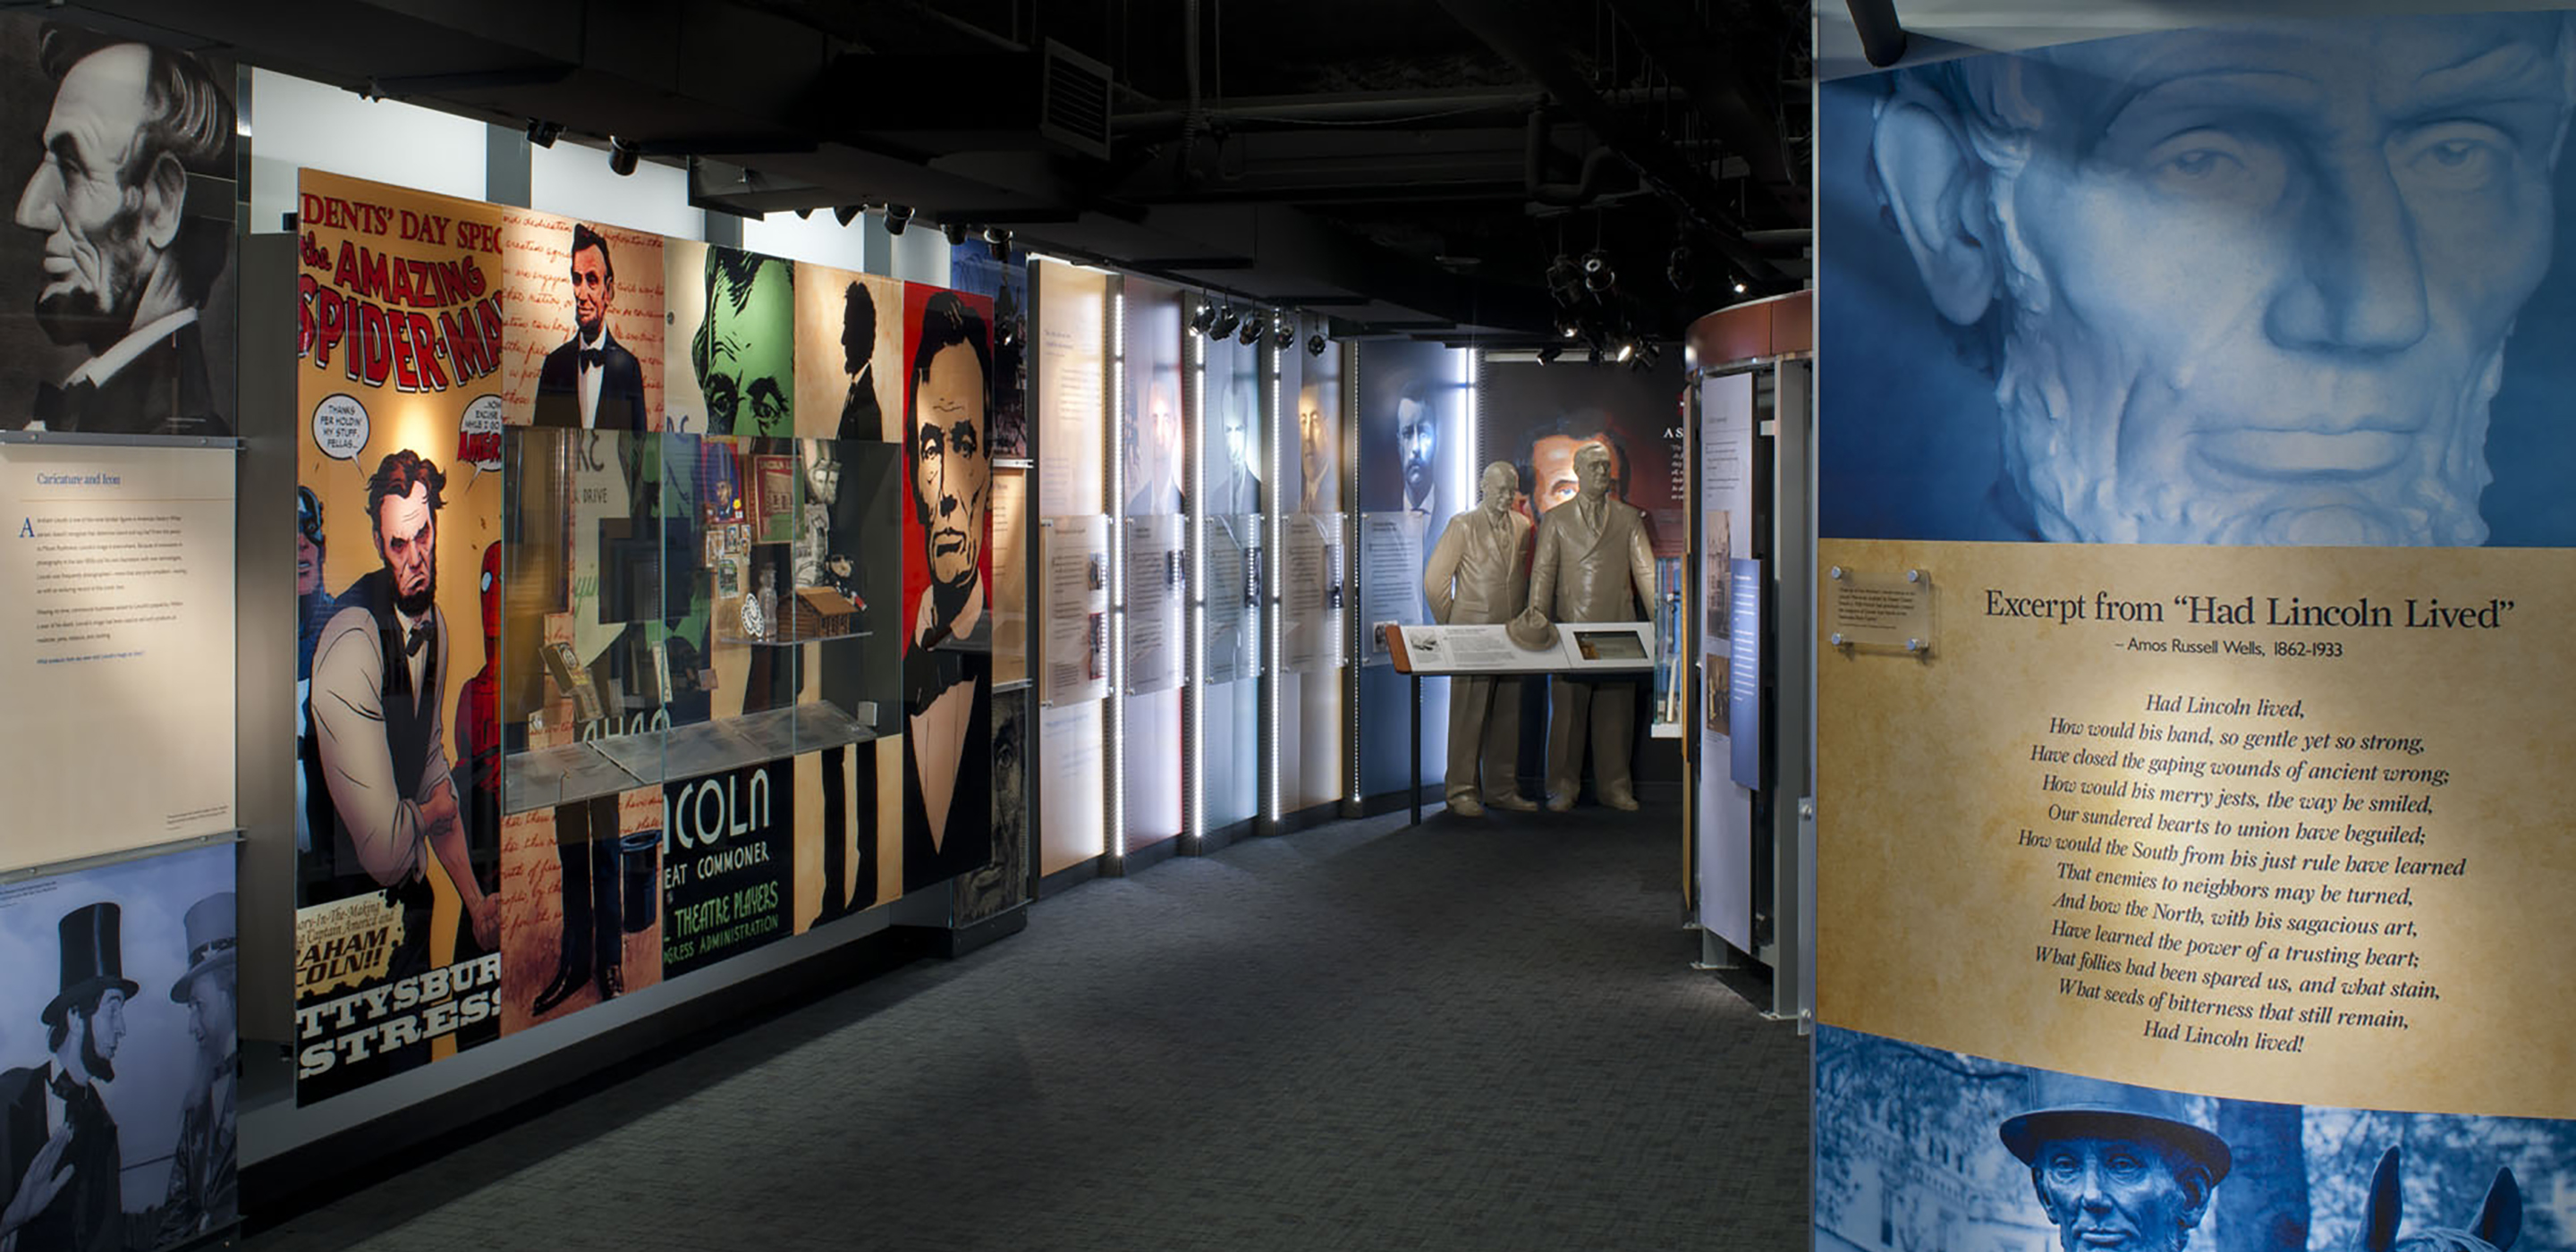 At left is a wall with a cartoon of Lincoln with Spiderman and brightly colored portraits of Lincoln. At right are photos of prominent Lincoln statues.